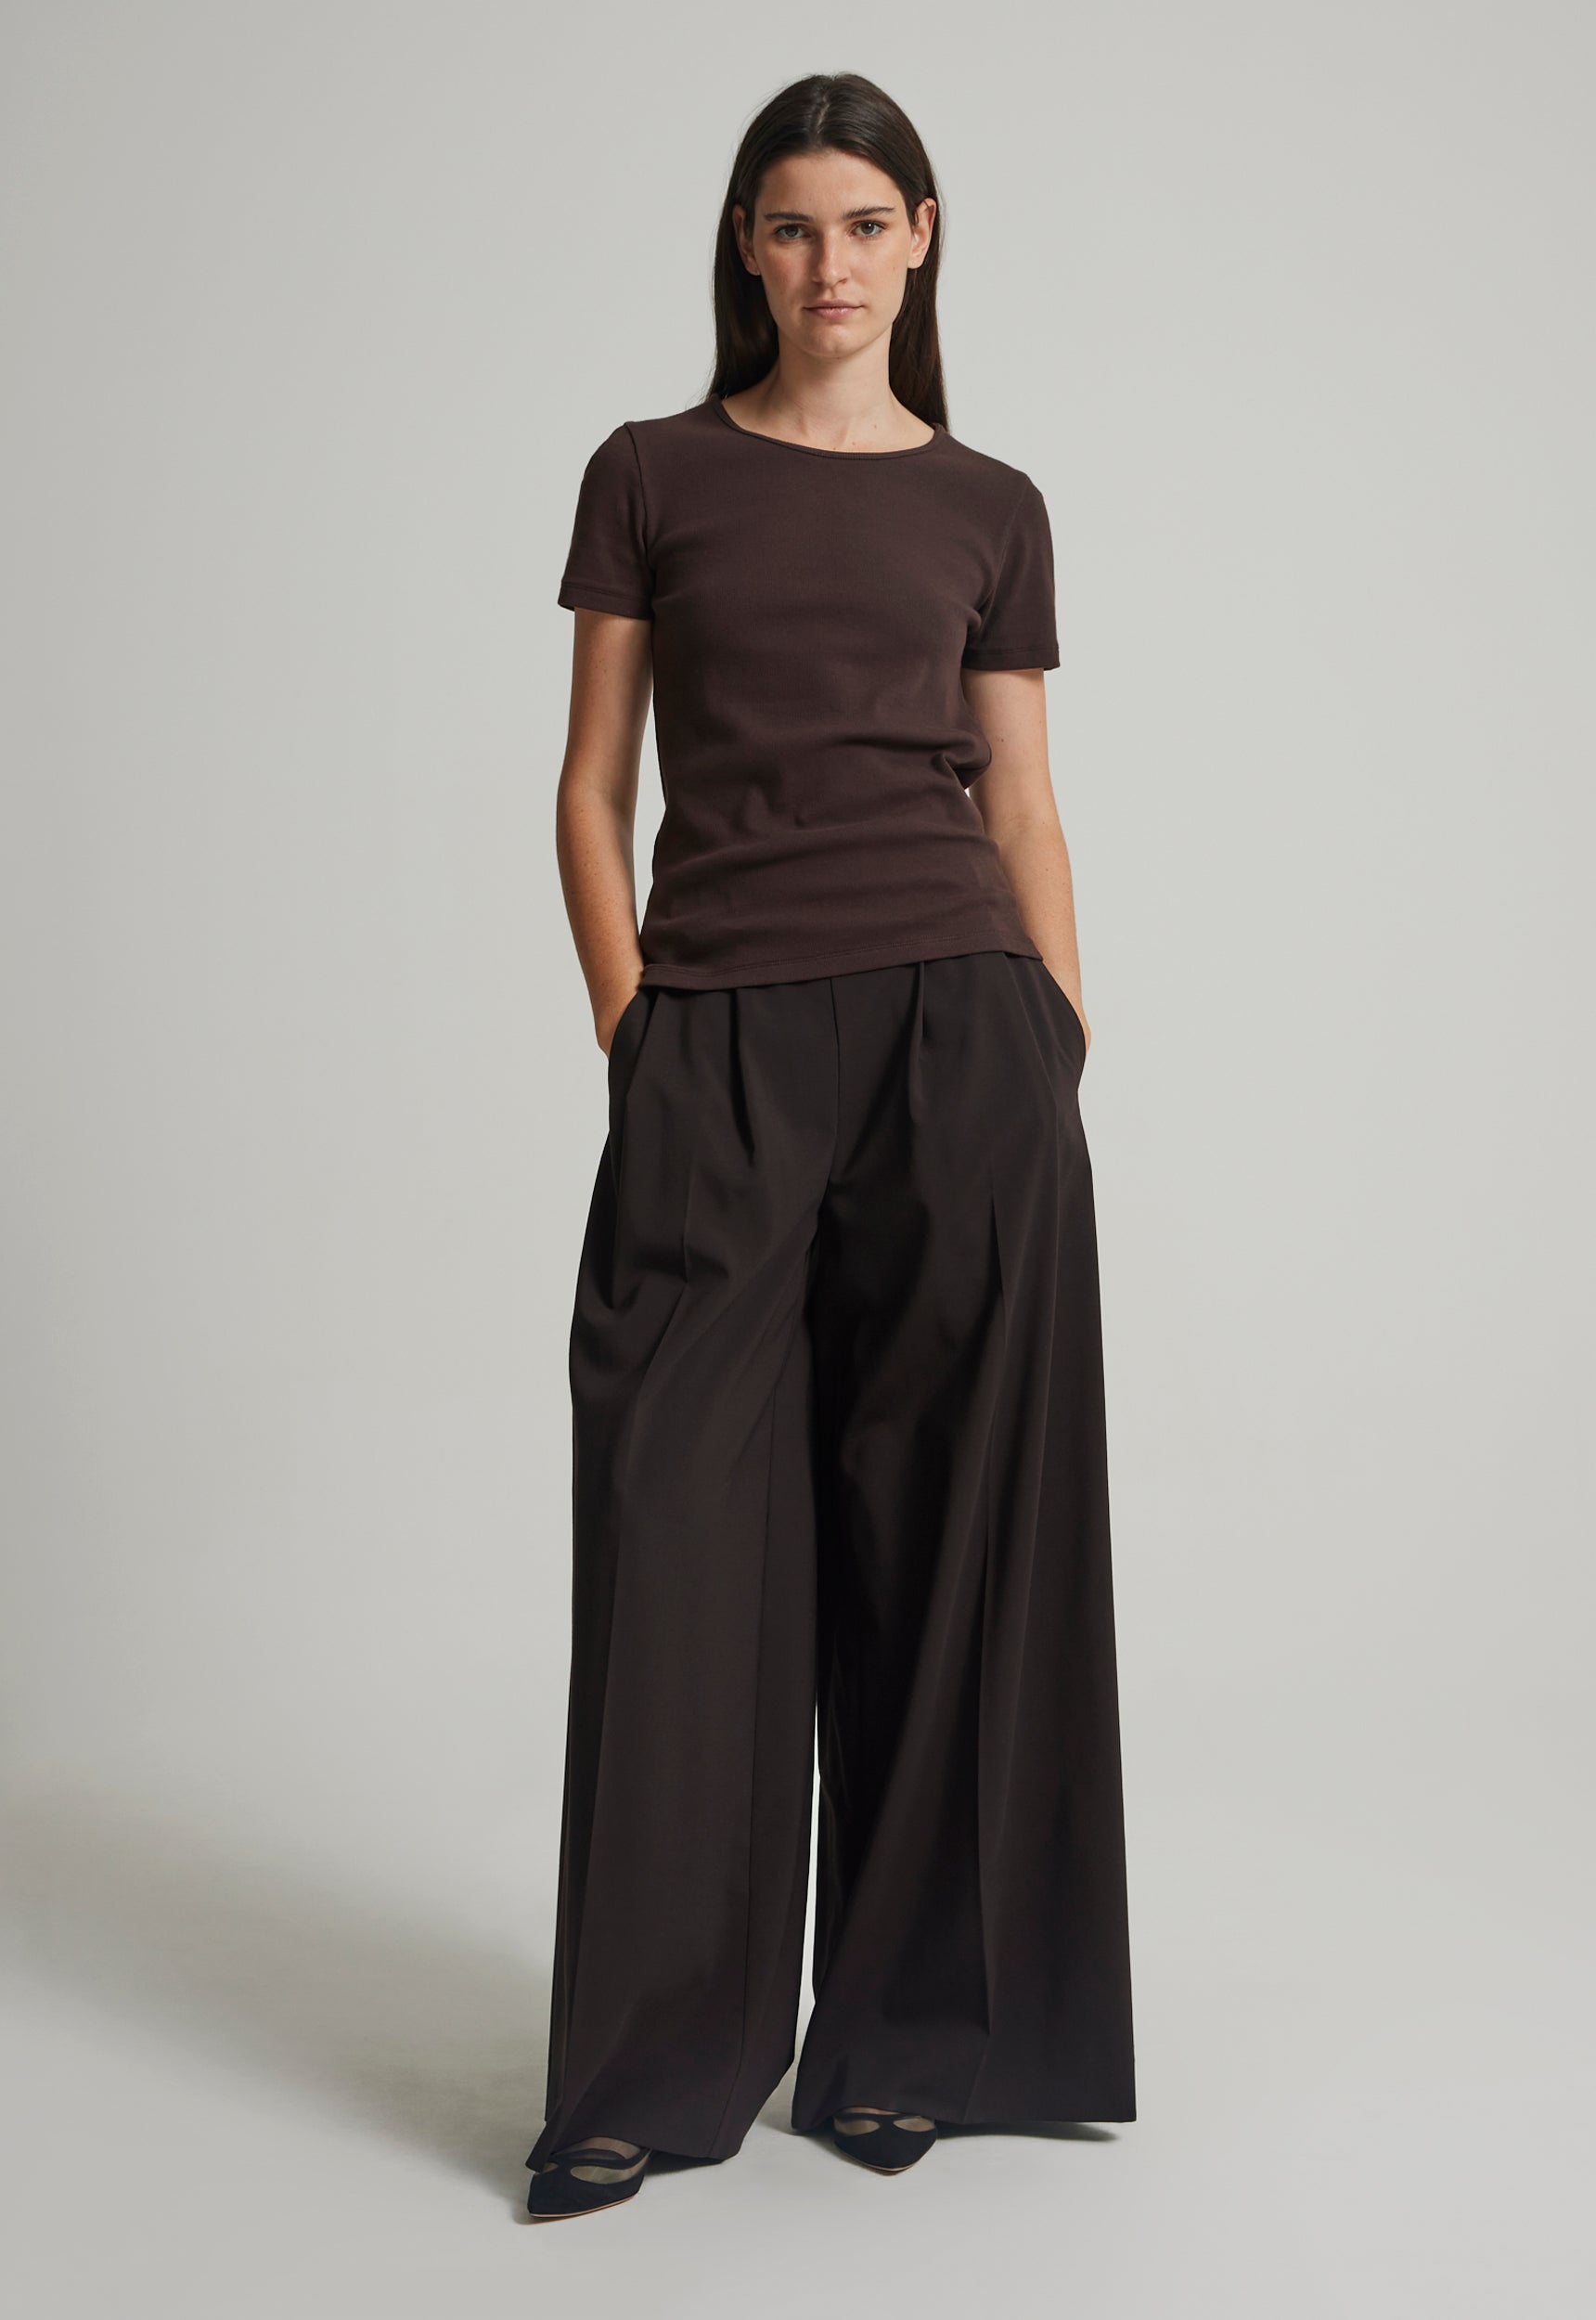 Maison Wool Pant in Chocolate Pepper